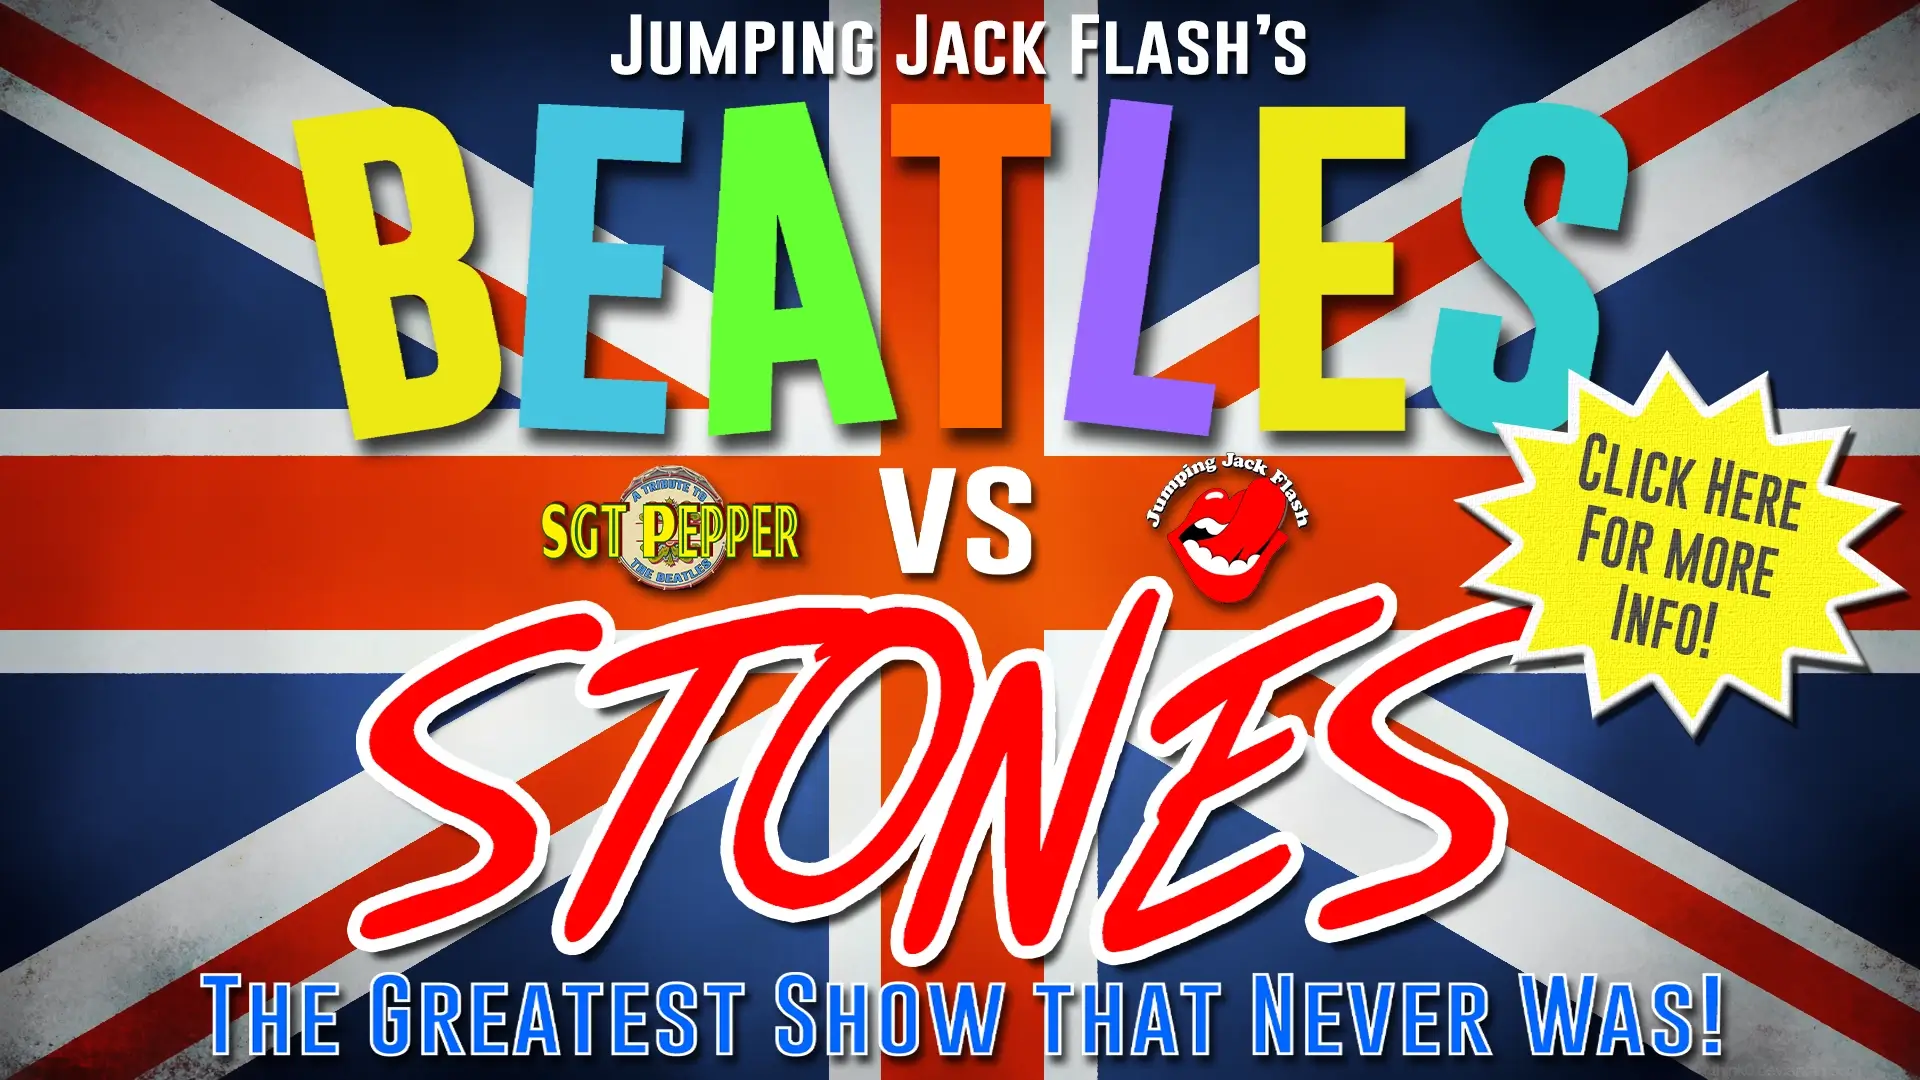 Beatles vs. Stones: The Greatest Show that Never Was!